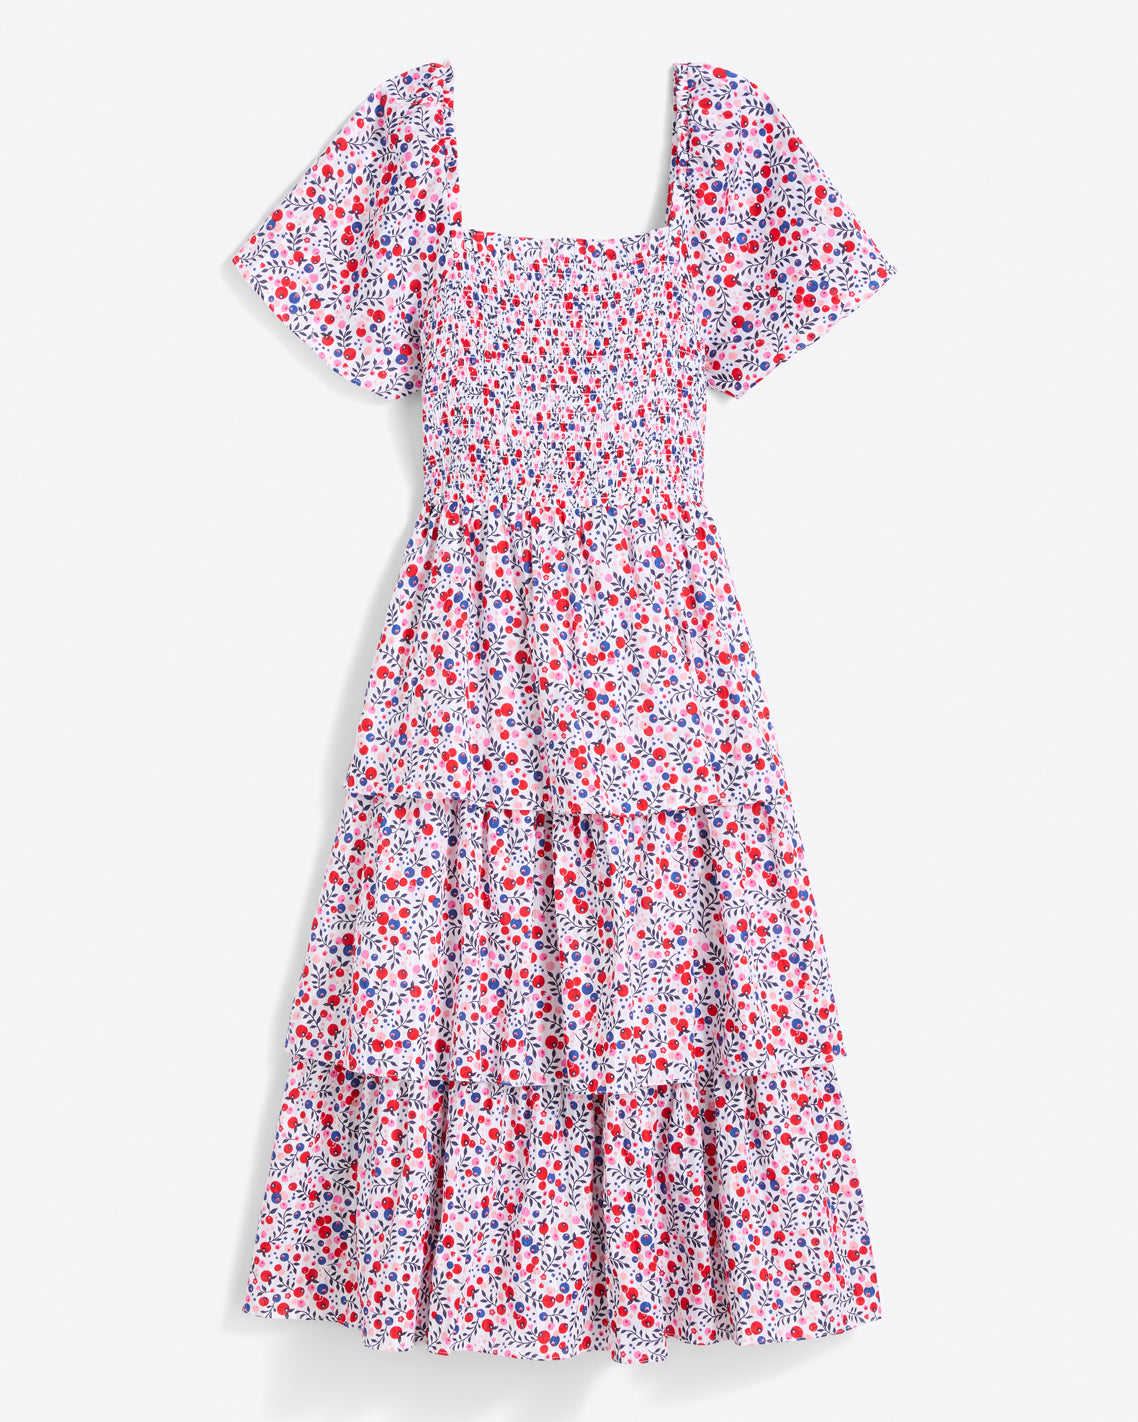 Deana Tiered Smocked Dress in Berry Print